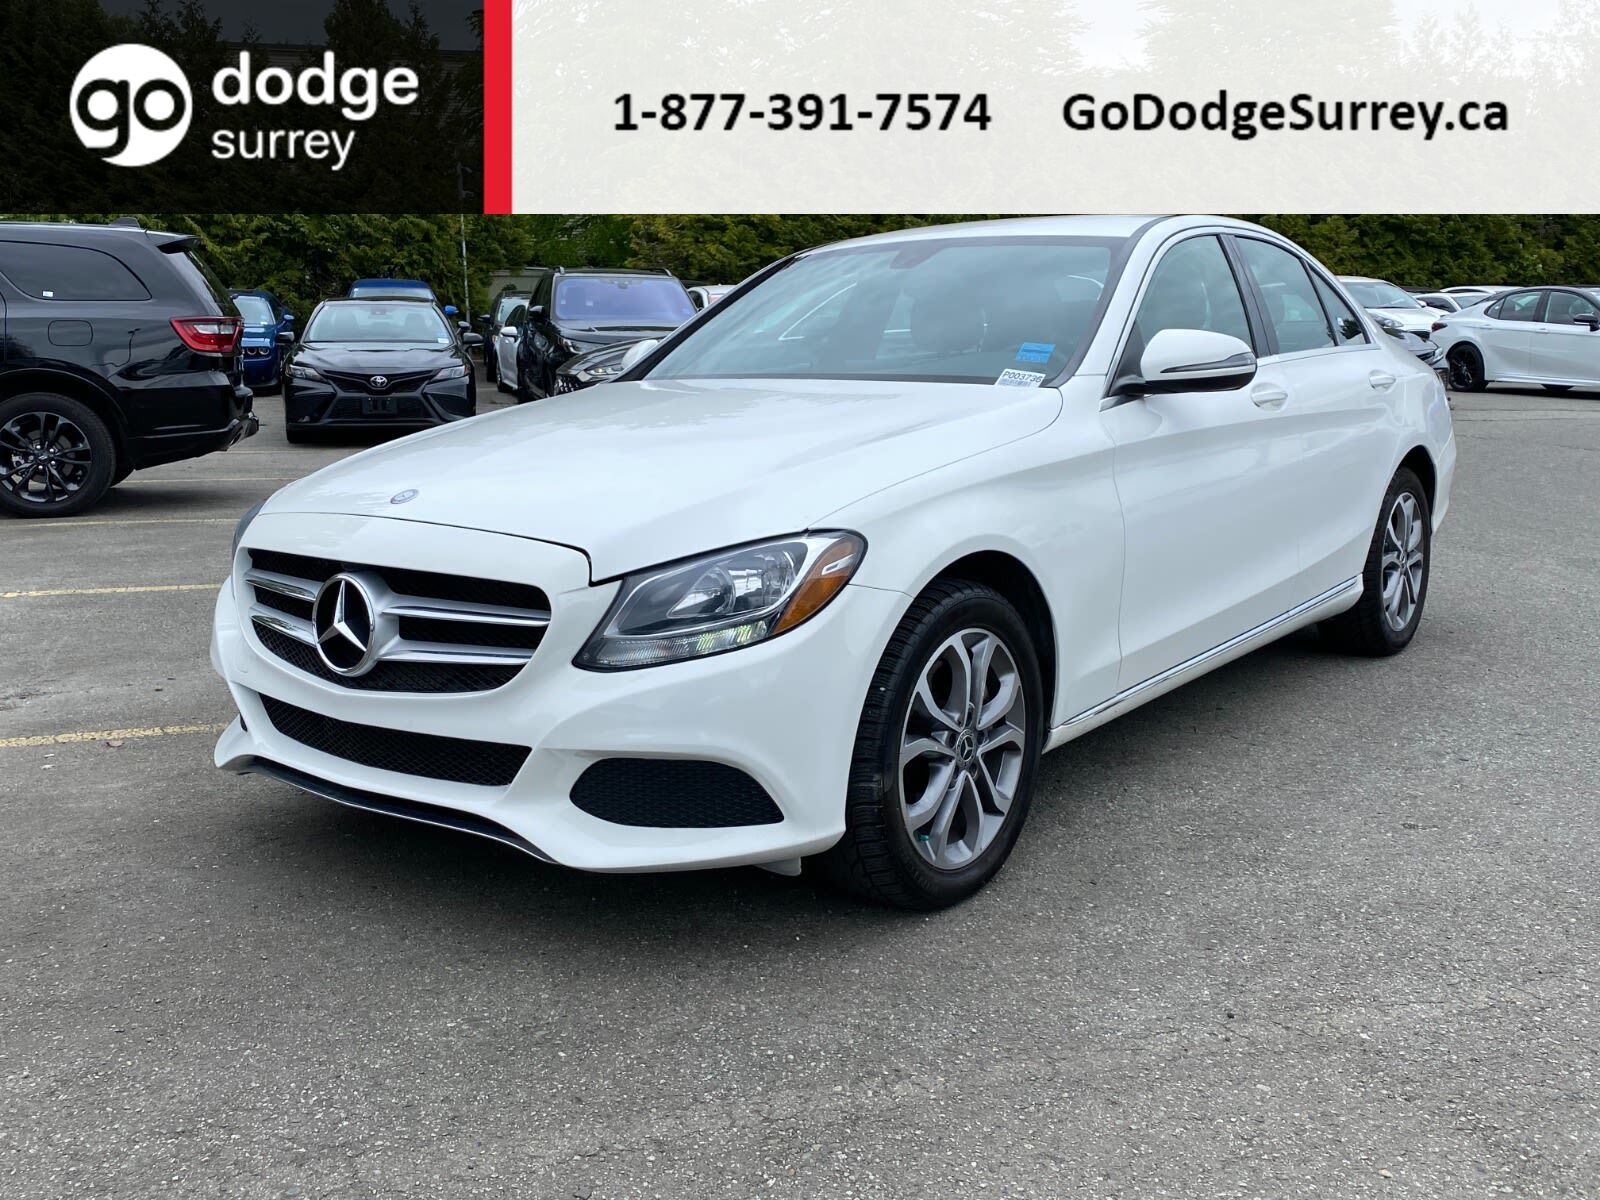 2017 Mercedes-Benz C-Class C 300 + 4MATIC/LEATHER/REAR VIEW CAM/NO EXTRA FEES